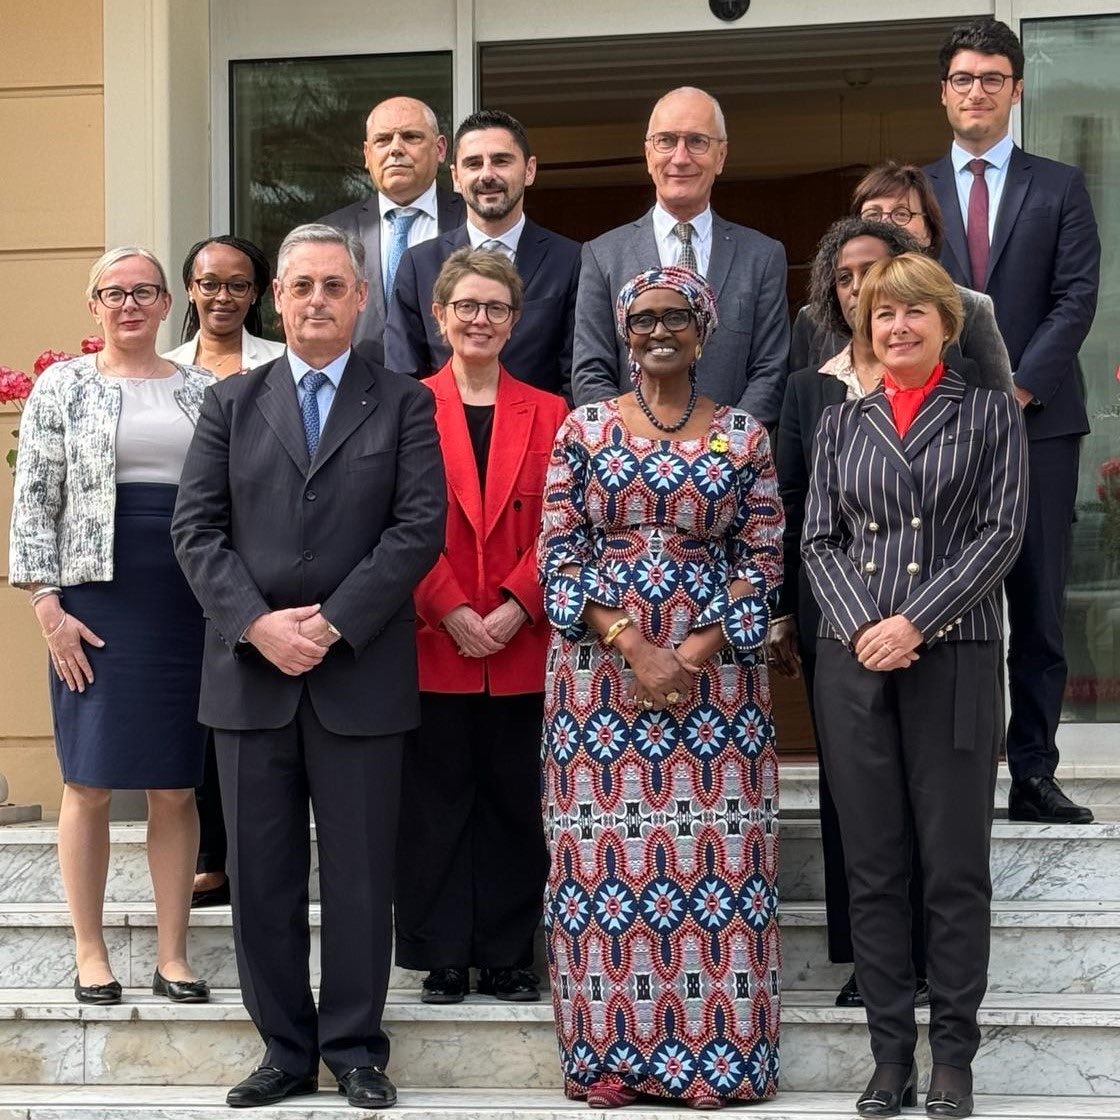 We are grateful for the political & financial support that 🇲🇨 continues to provide to @UNAIDS each year through a multi-year arrangement. So much to learn from @GvtMonaco’s commitment to ending aids both at home and around the world.